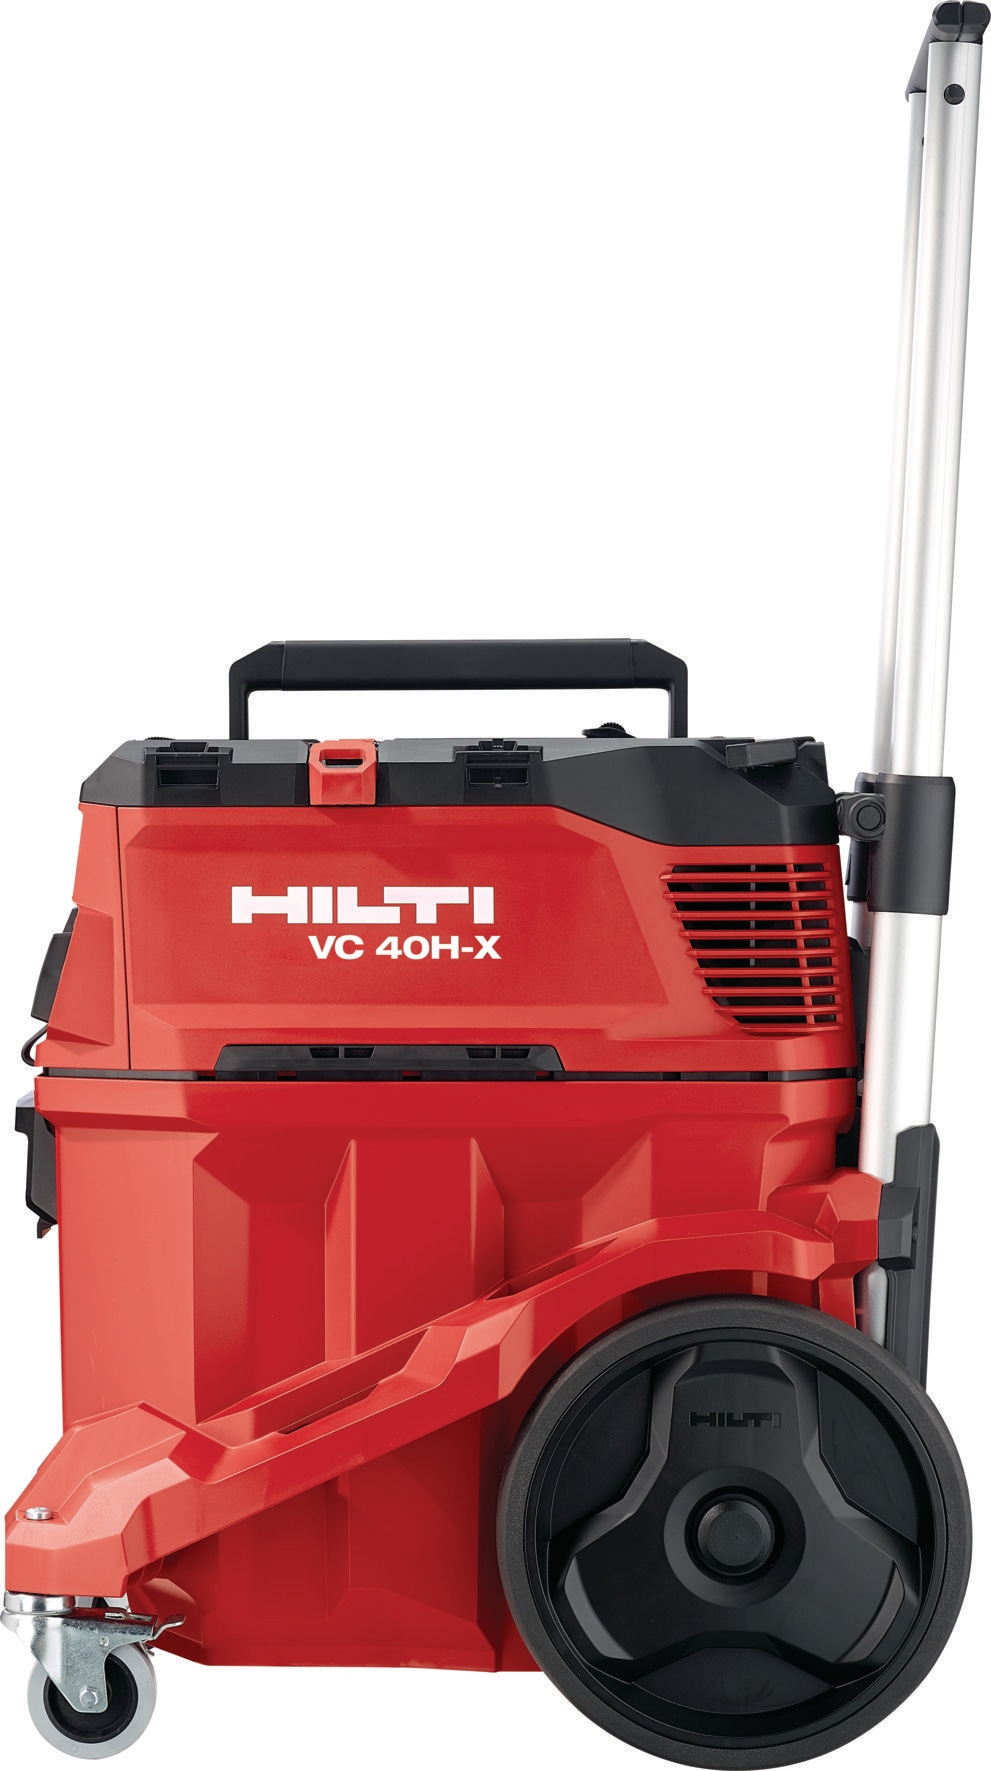 VC 40H-X Wet/dry H-class dust collector - Jobsite Vacuum Cleaners